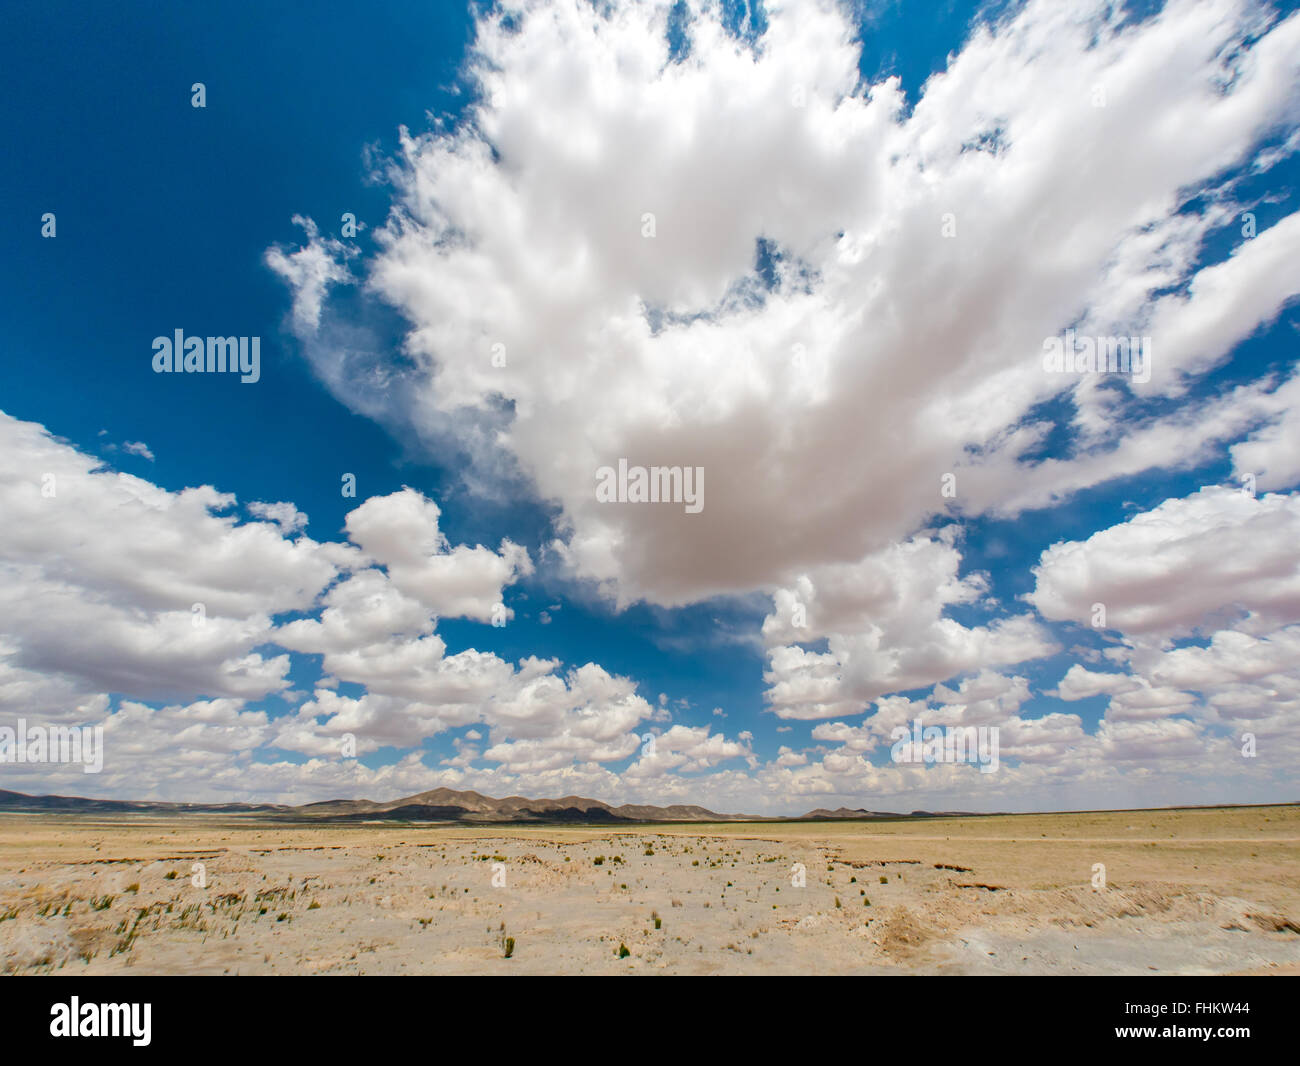 a lot of beatyful clouds in the desert Stock Photo